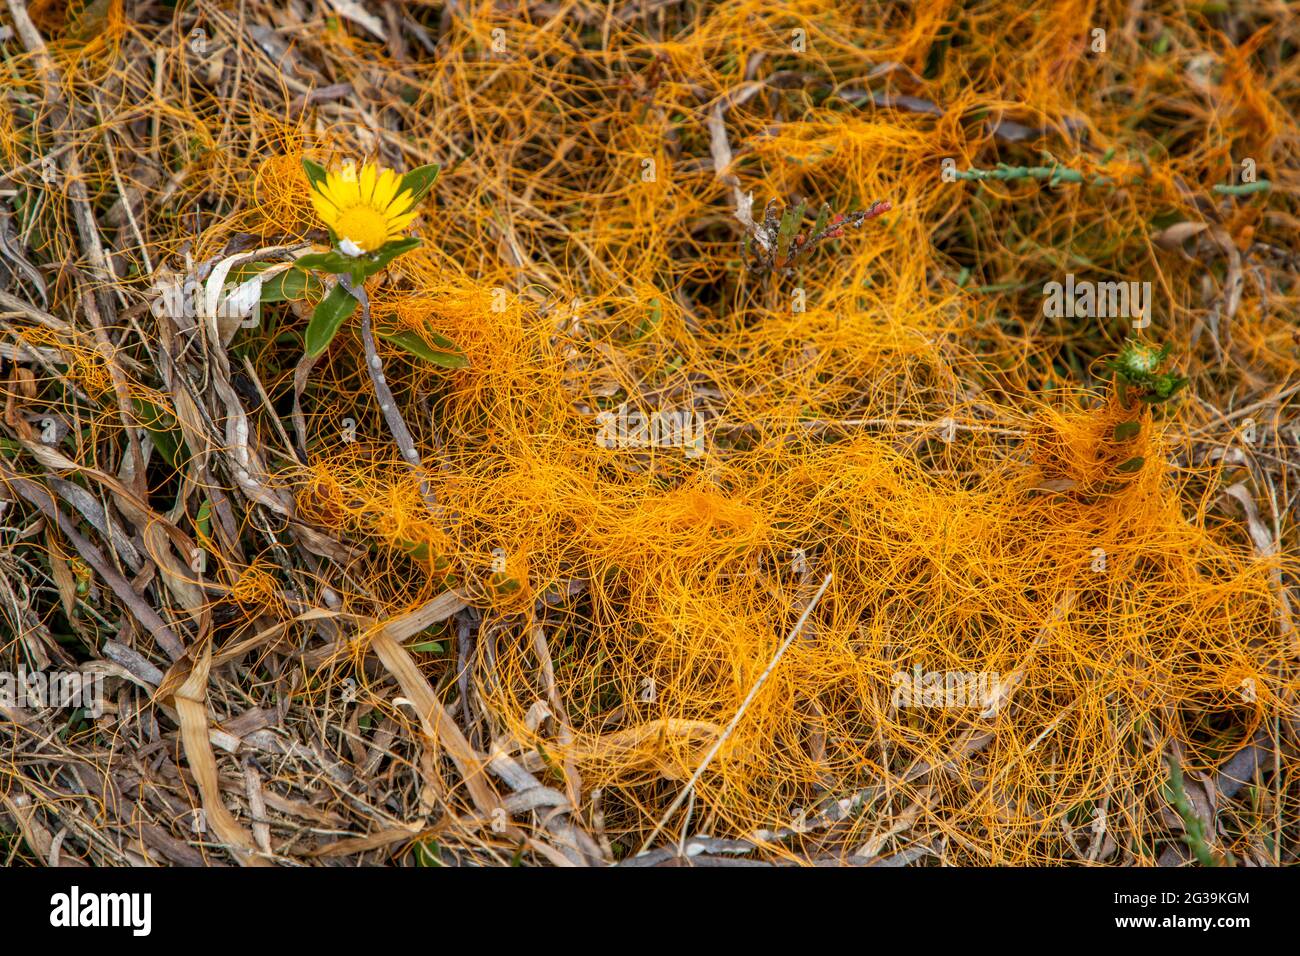 Dodder plant found around Tomales Bay. The bay is a long narrow inlet of the Pacific Ocean in Marin County, California. Much of the surrounding area i Stock Photo